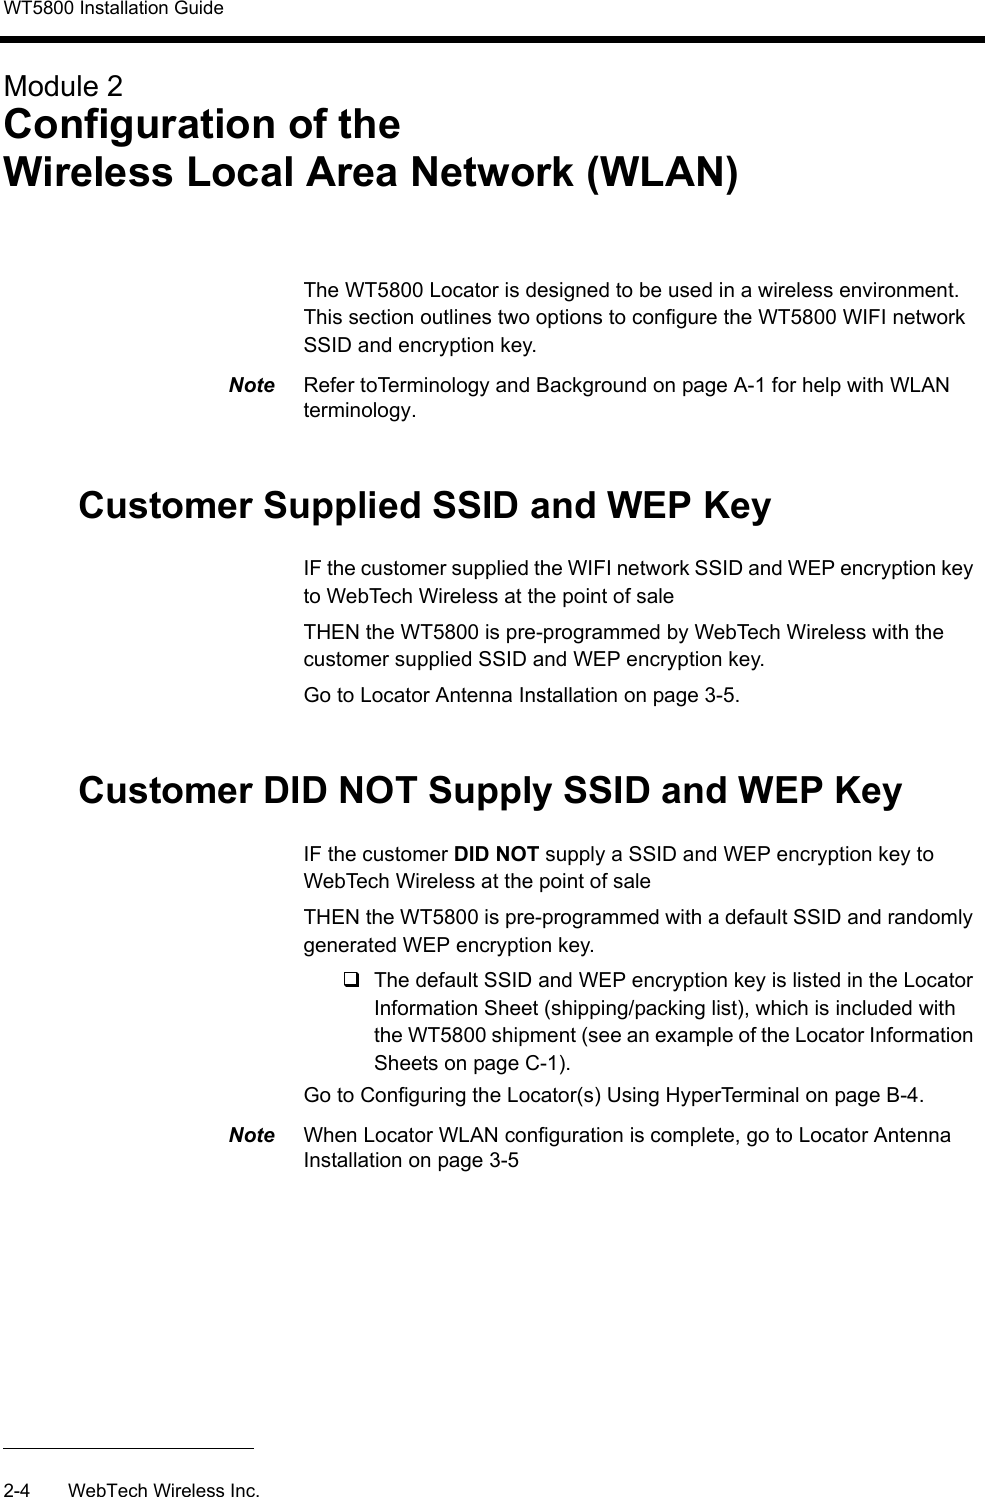 WT5800 Installation Guide2-4 WebTech Wireless Inc.Module 2Configuration of the Wireless Local Area Network (WLAN)The WT5800 Locator is designed to be used in a wireless environment. This section outlines two options to configure the WT5800 WIFI network SSID and encryption key.Note  Refer toTerminology and Background on page A-1 for help with WLAN terminology.Customer Supplied SSID and WEP KeyIF the customer supplied the WIFI network SSID and WEP encryption key to WebTech Wireless at the point of sale THEN the WT5800 is pre-programmed by WebTech Wireless with the customer supplied SSID and WEP encryption key.Go to Locator Antenna Installation on page 3-5.Customer DID NOT Supply SSID and WEP Key IF the customer DID NOT supply a SSID and WEP encryption key to WebTech Wireless at the point of saleTHEN the WT5800 is pre-programmed with a default SSID and randomly generated WEP encryption key. The default SSID and WEP encryption key is listed in the Locator Information Sheet (shipping/packing list), which is included with the WT5800 shipment (see an example of the Locator Information Sheets on page C-1).Go to Configuring the Locator(s) Using HyperTerminal on page B-4.Note  When Locator WLAN configuration is complete, go to Locator Antenna Installation on page 3-5